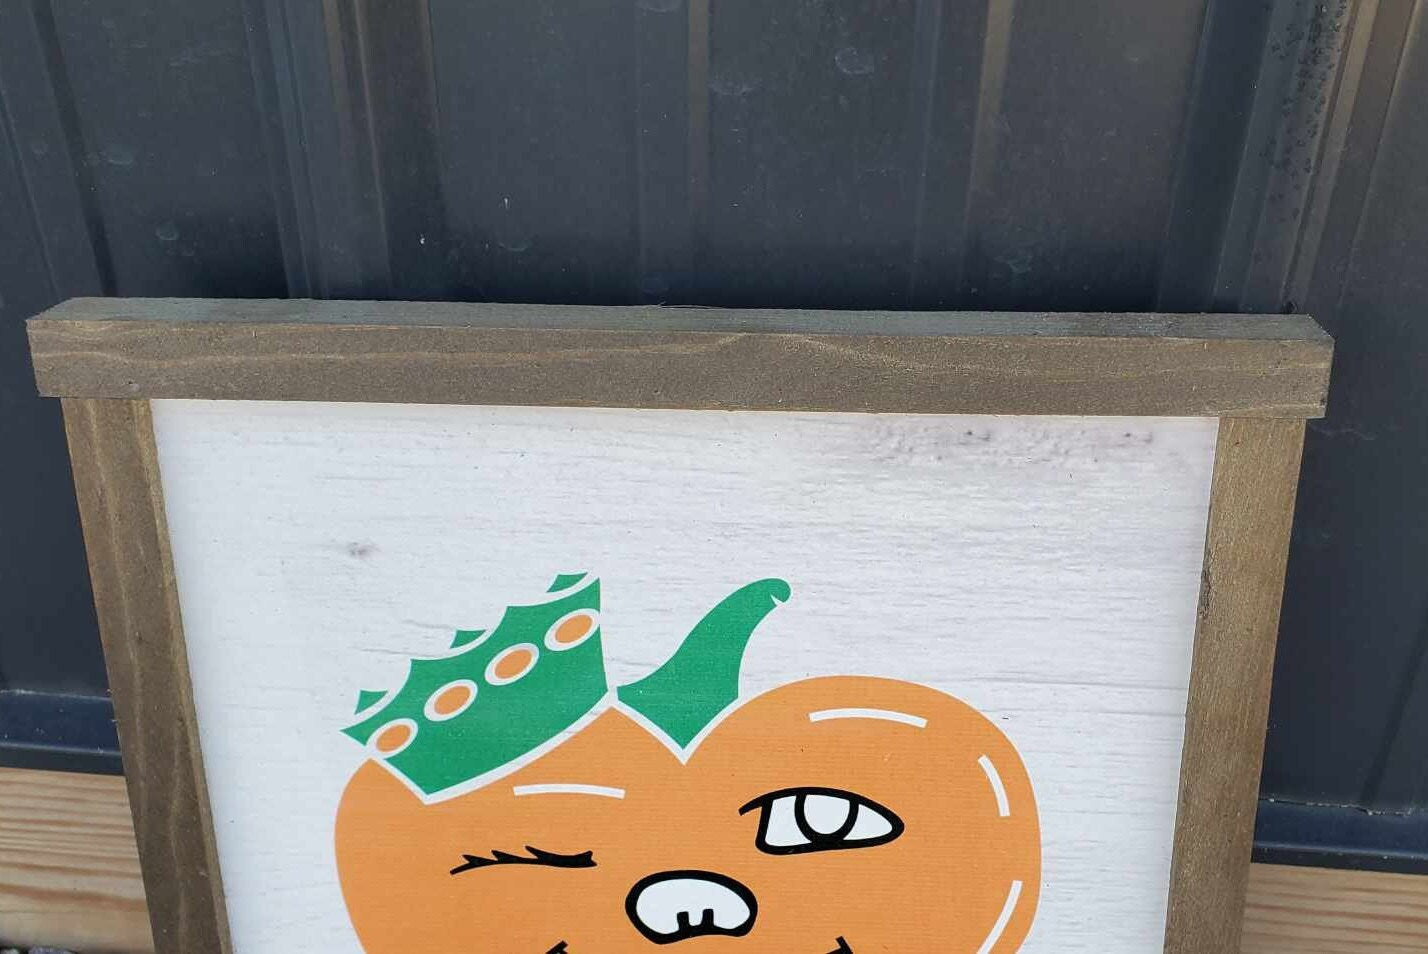 Hometown Winky Pumpkin Circleville Round Town Small Town Home Decor Mascot Farm Orange and Green White Wash Wooden Wood Smile Happy Handmade